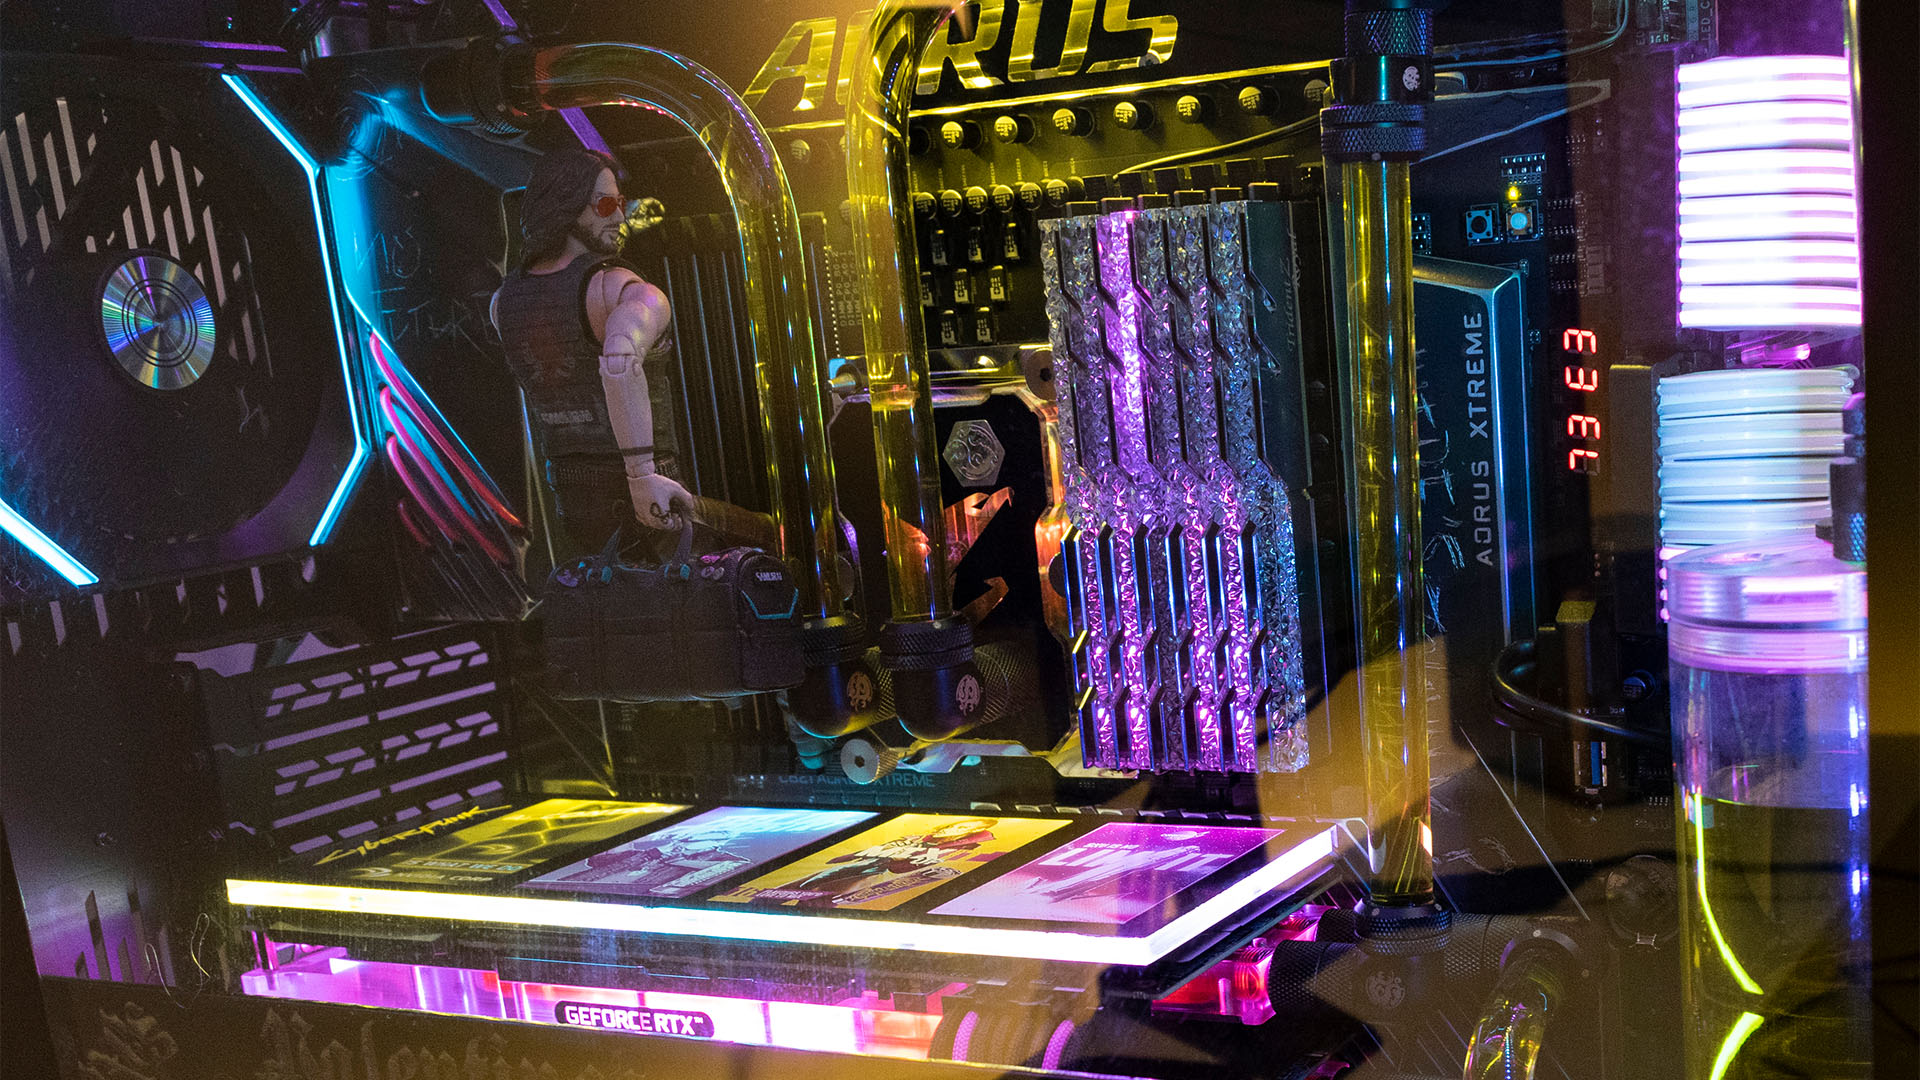 Inside a Cyberpunk 2077 PC build which features a Silverhand model, neon RAM, and a custom GPU backplate